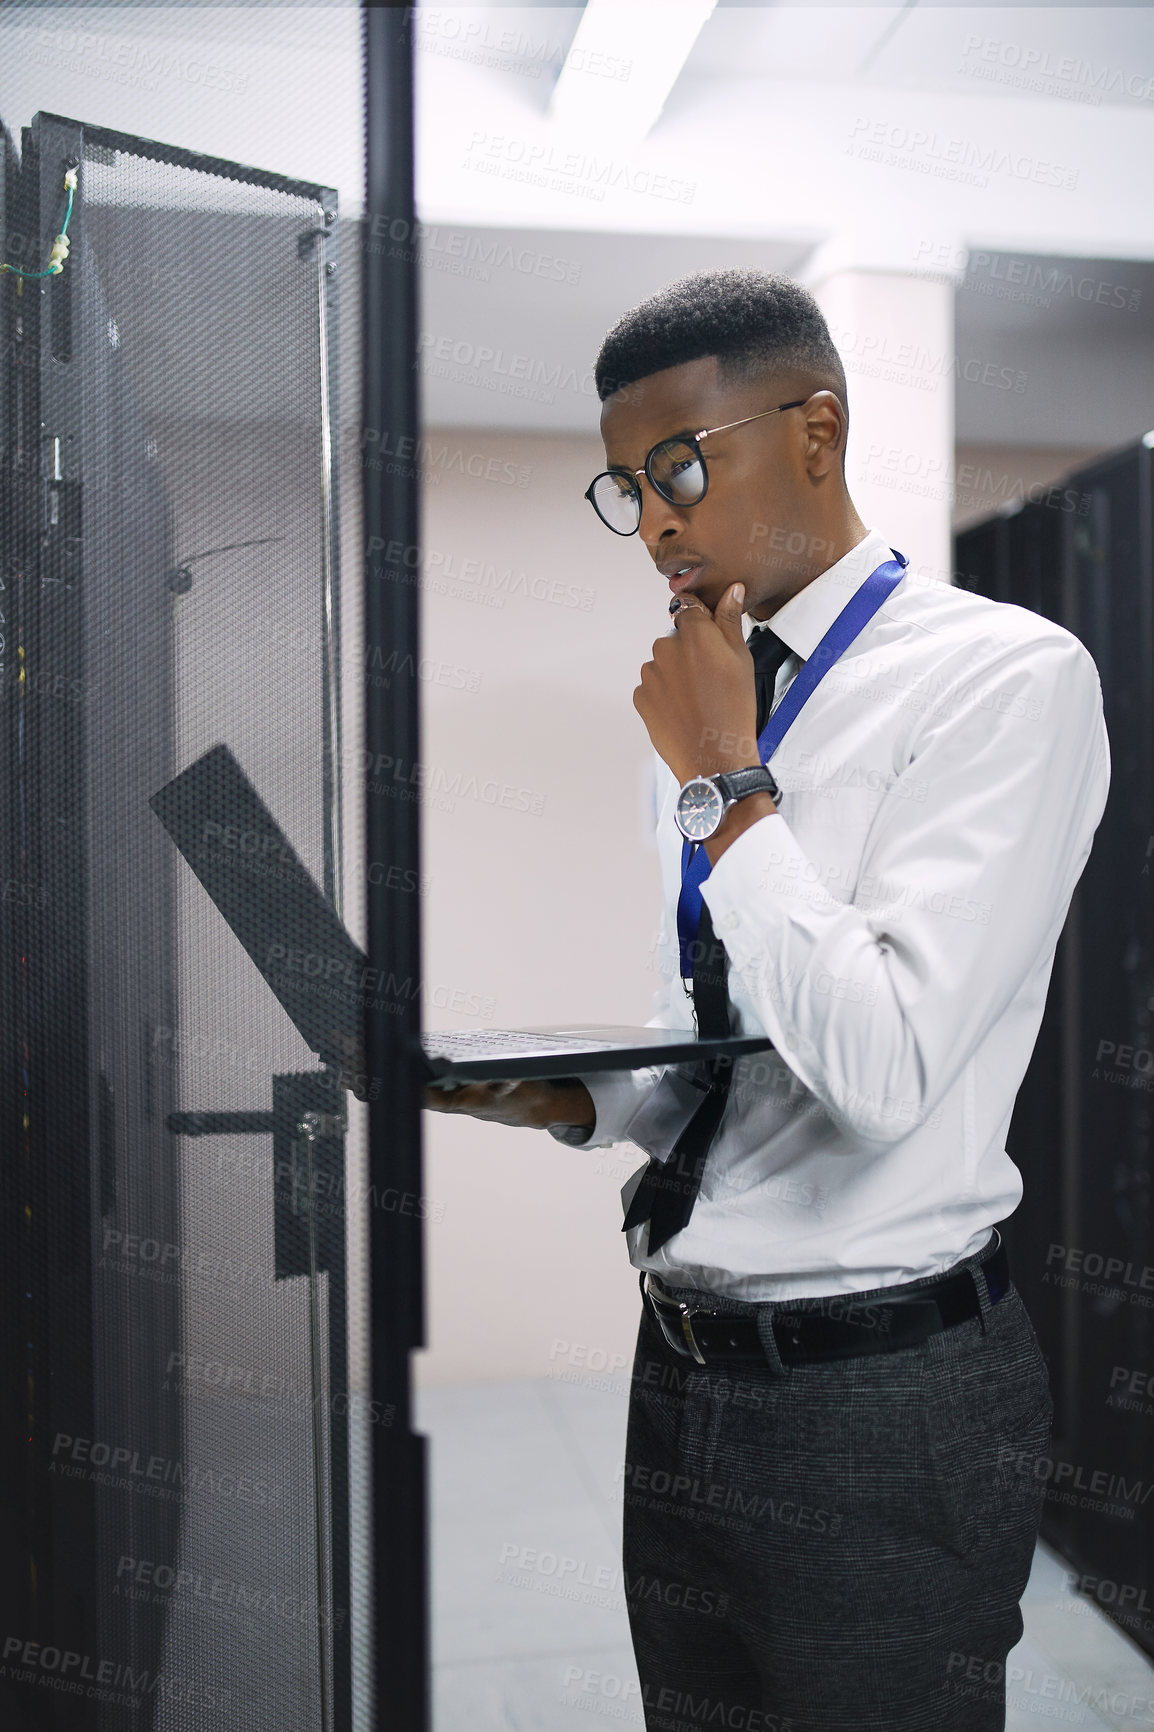 Buy stock photo Shot of a young male technician working in a server room